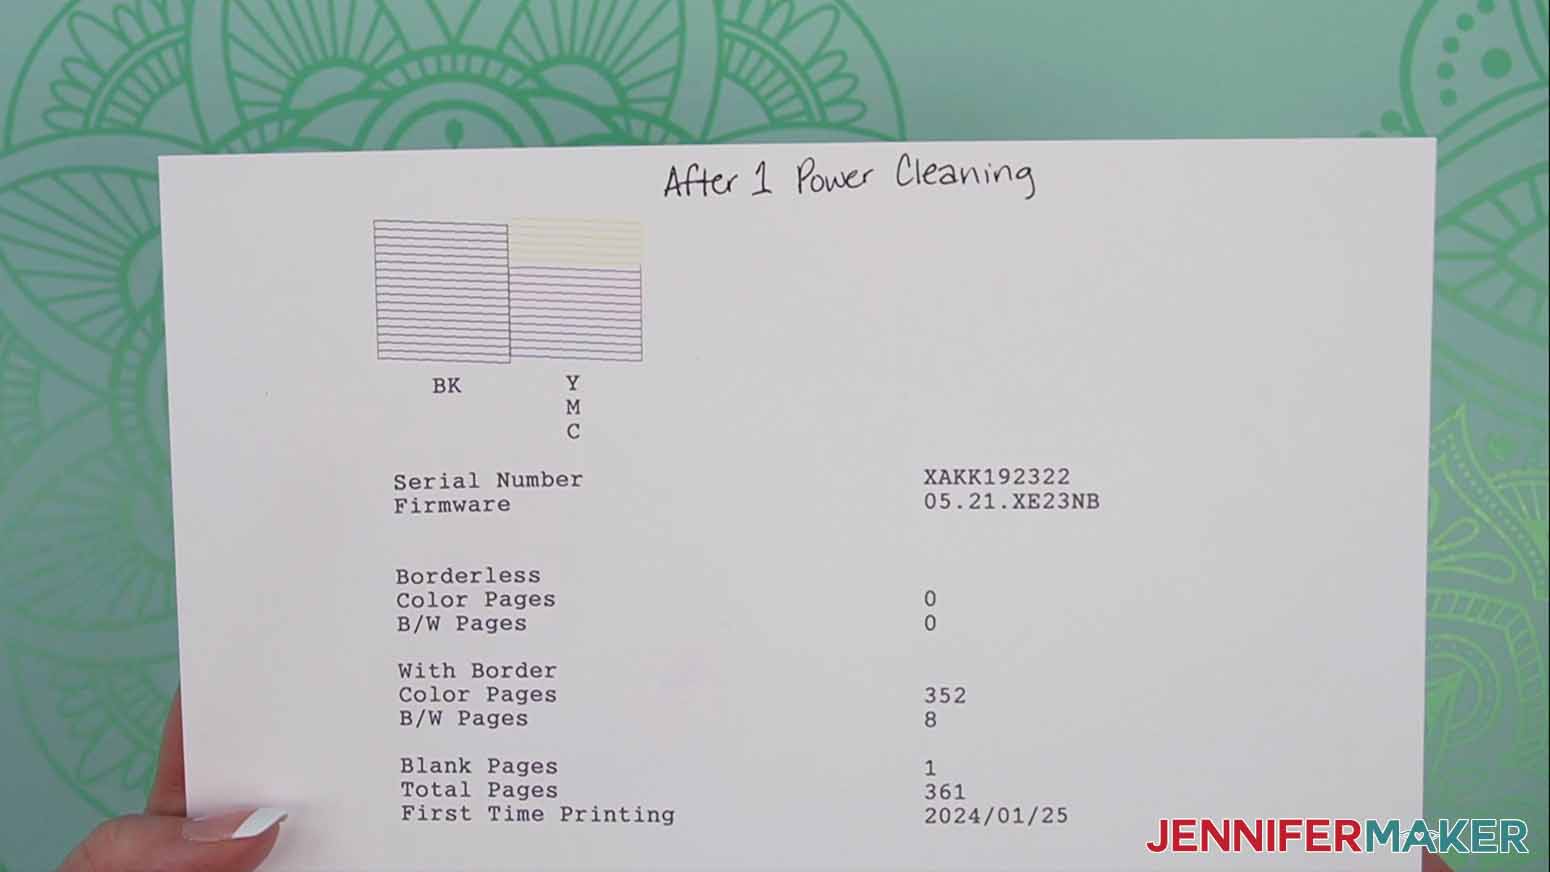 The next day, print a new nozzle check sheet to see if your power cleaning worked and your color lines are consistent.